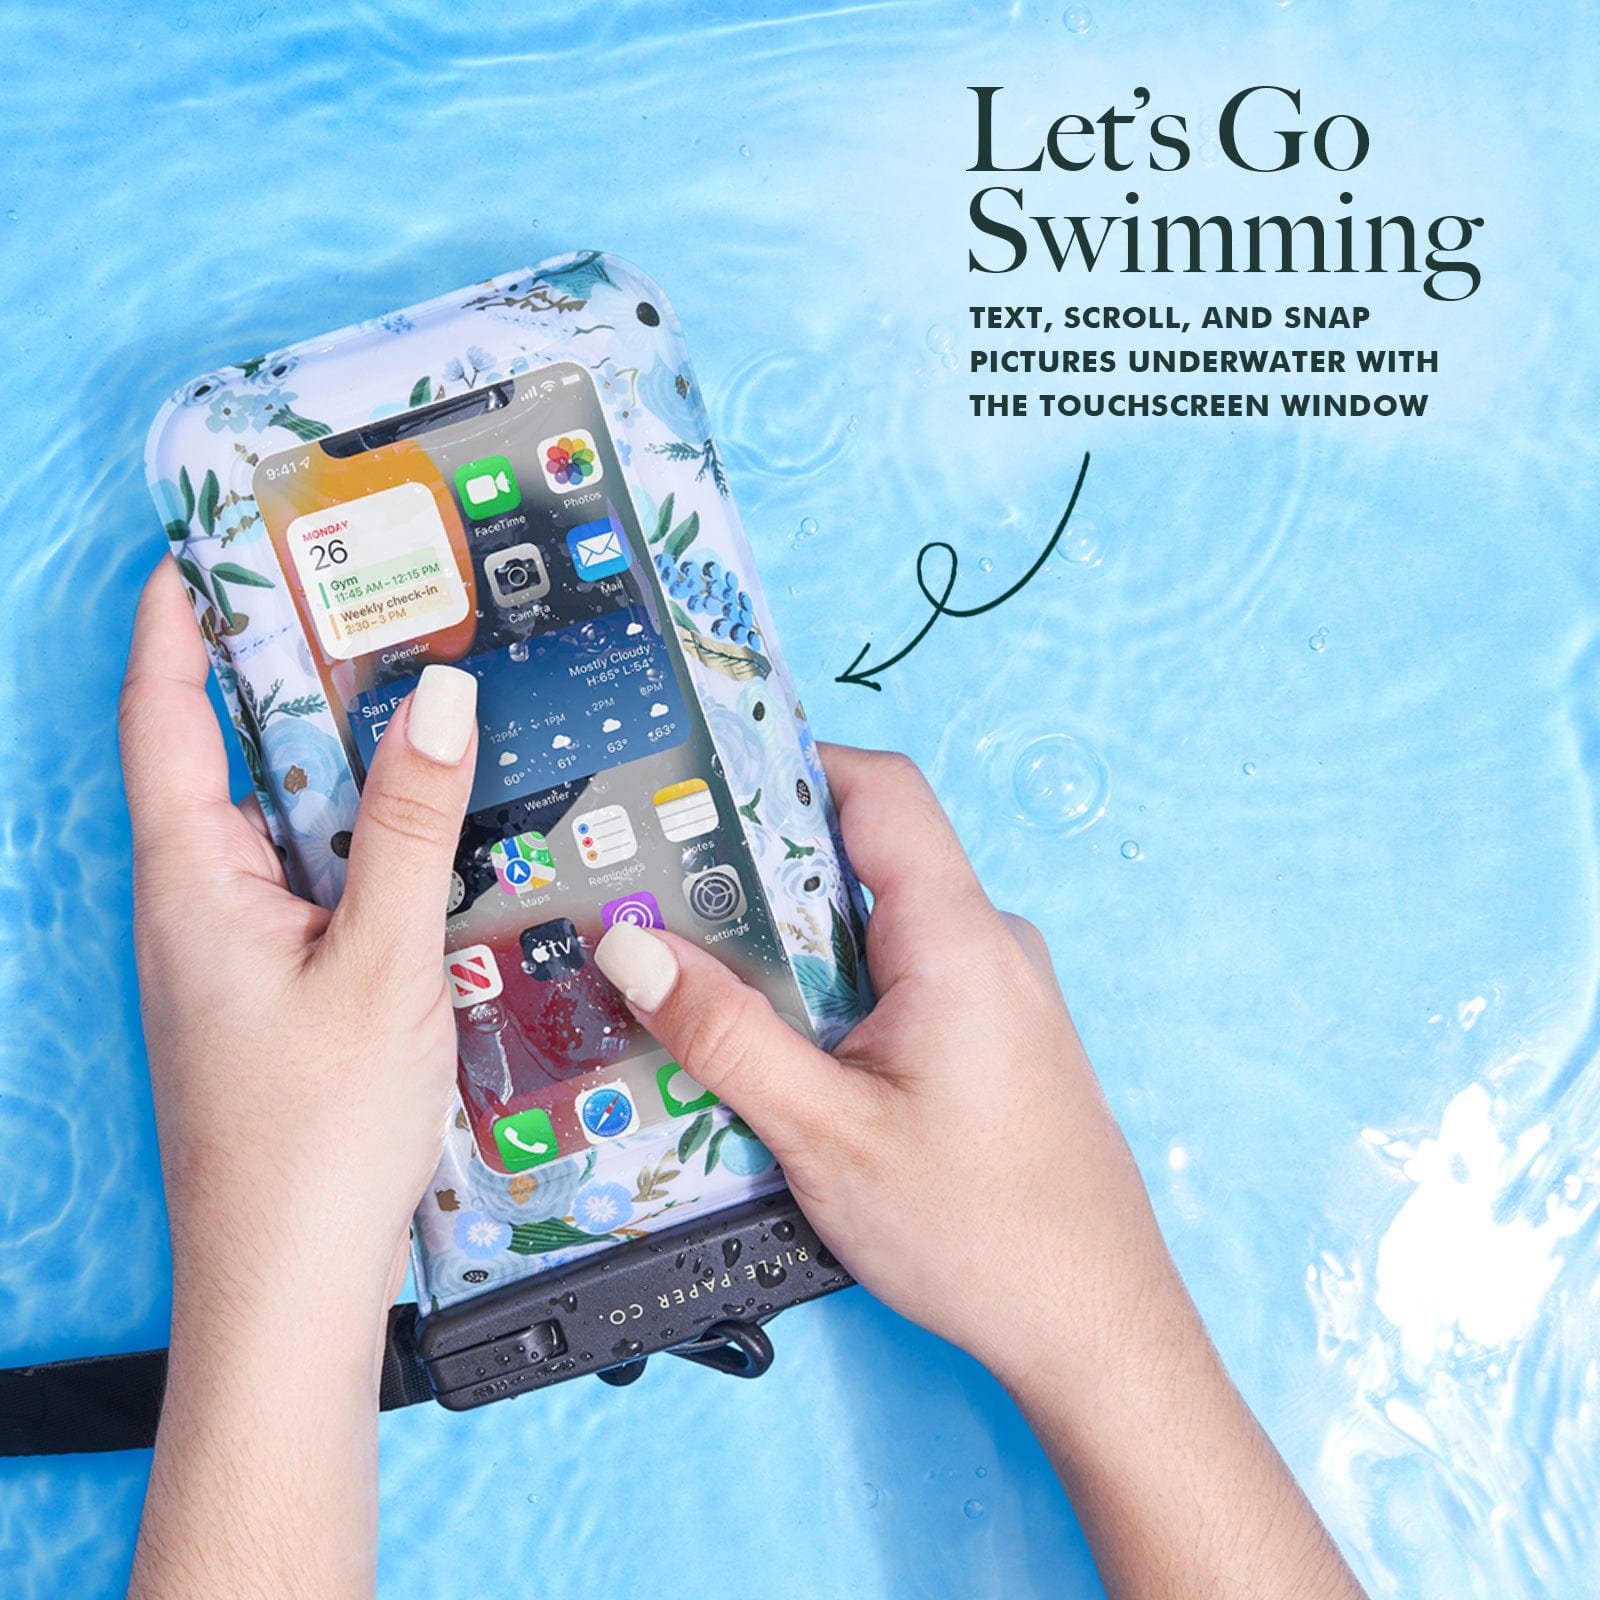 LET'S GO SWIMMING. TEXT, SCROLL, AND SNAP PICTURES UNDERWATER WITH THE TOUCHSCREEN WINDOW.